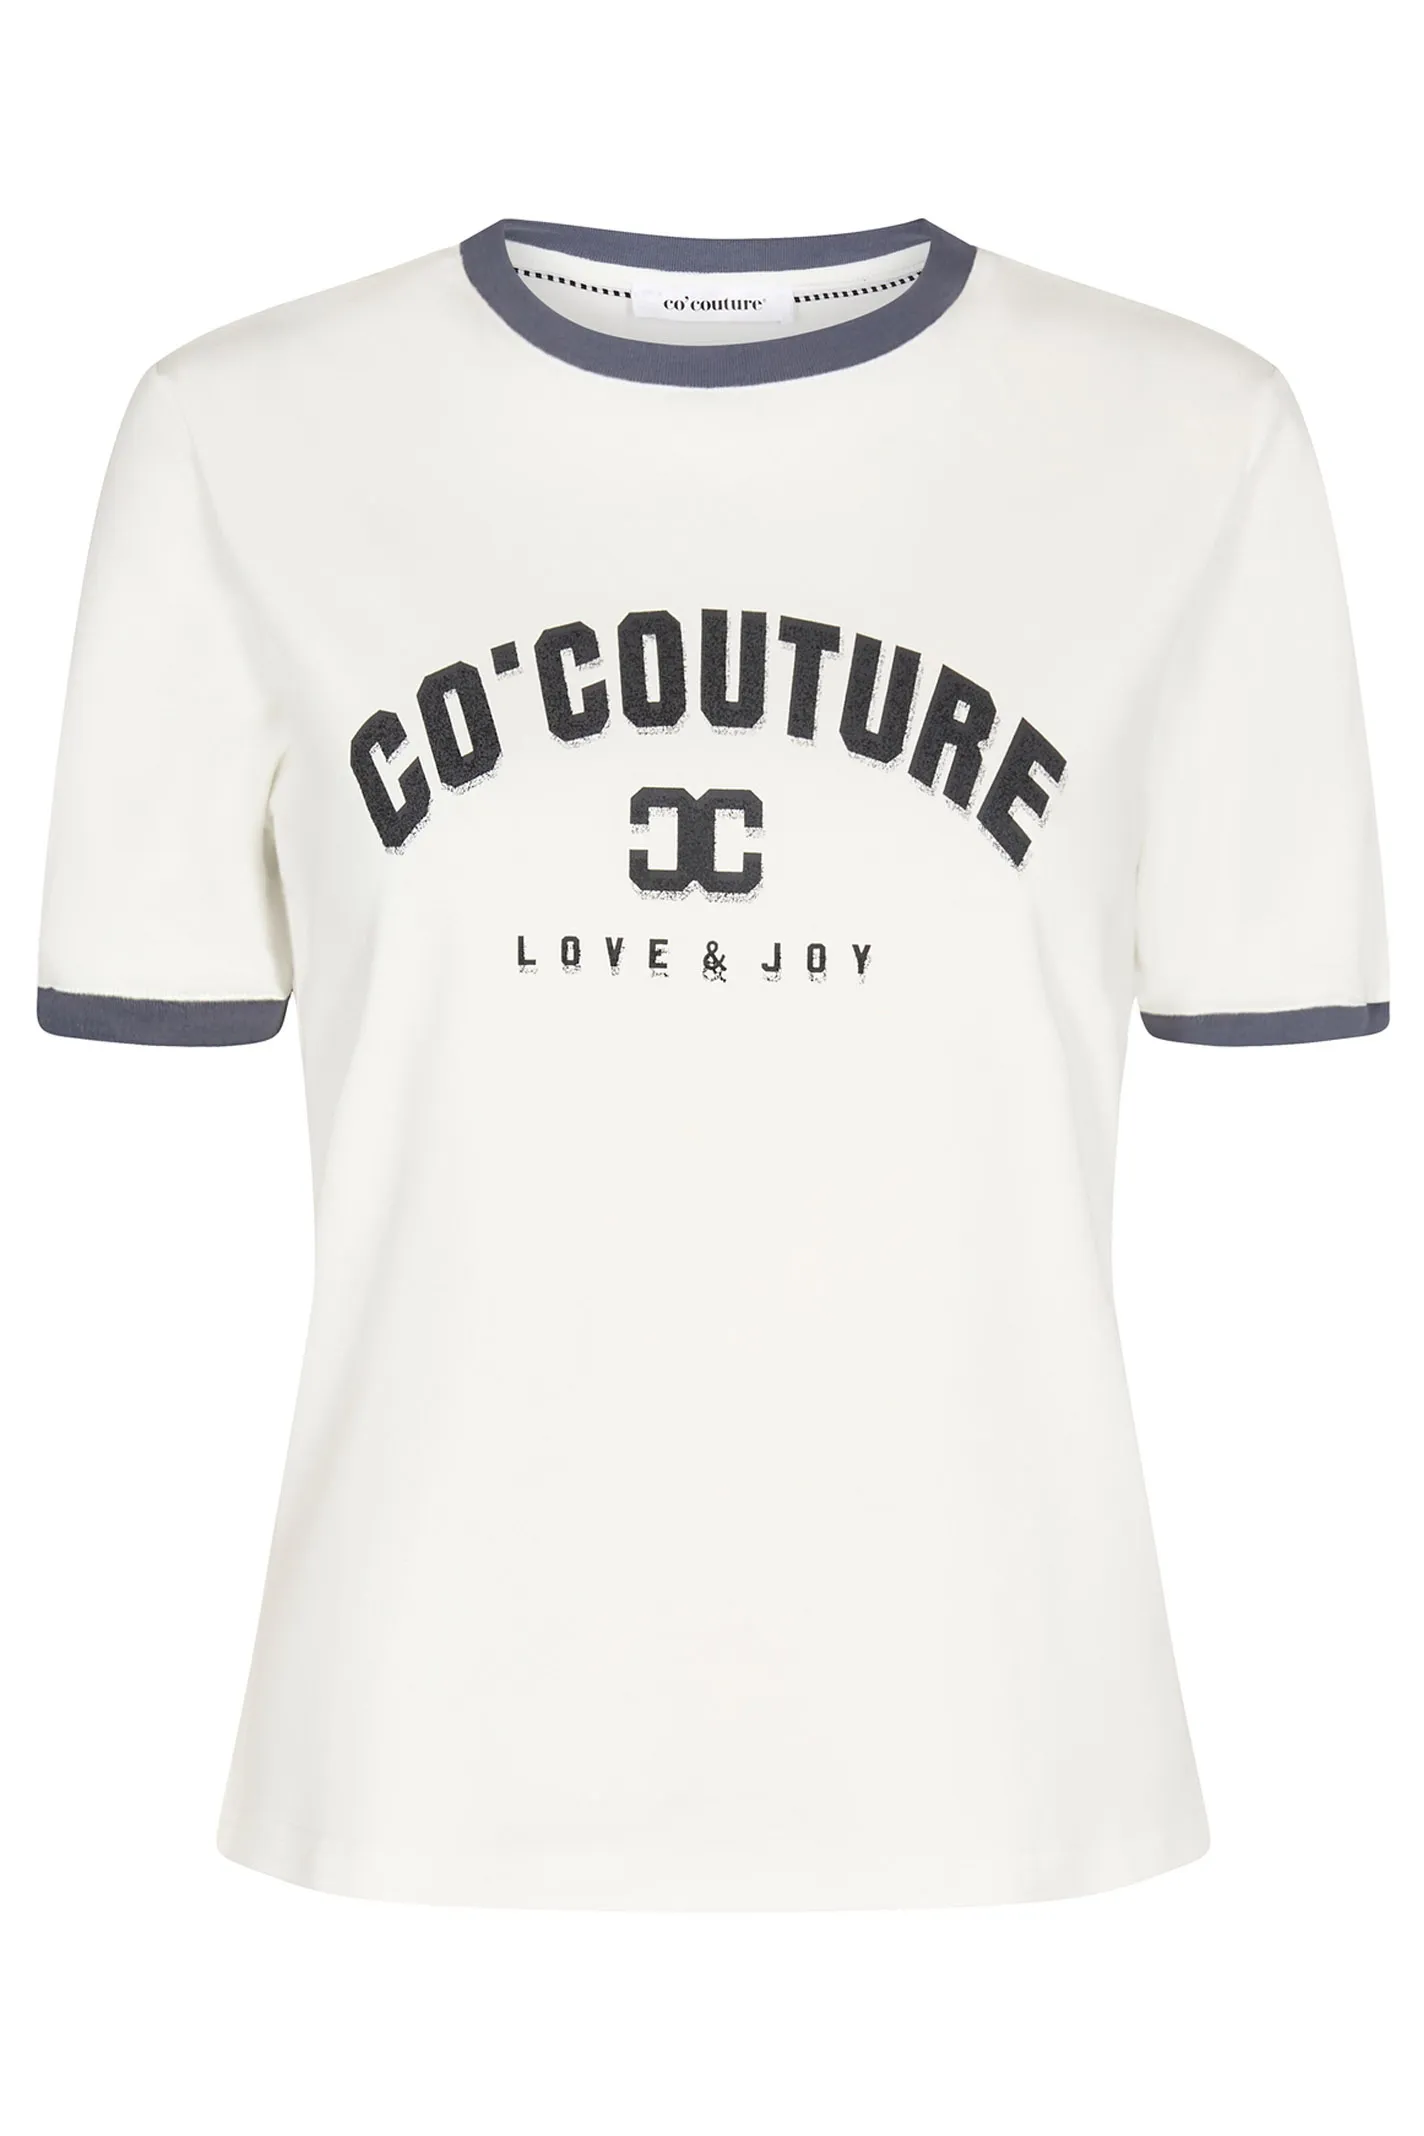 Co'couture nyheder | Shop Co'couture tøj Bustedwoman